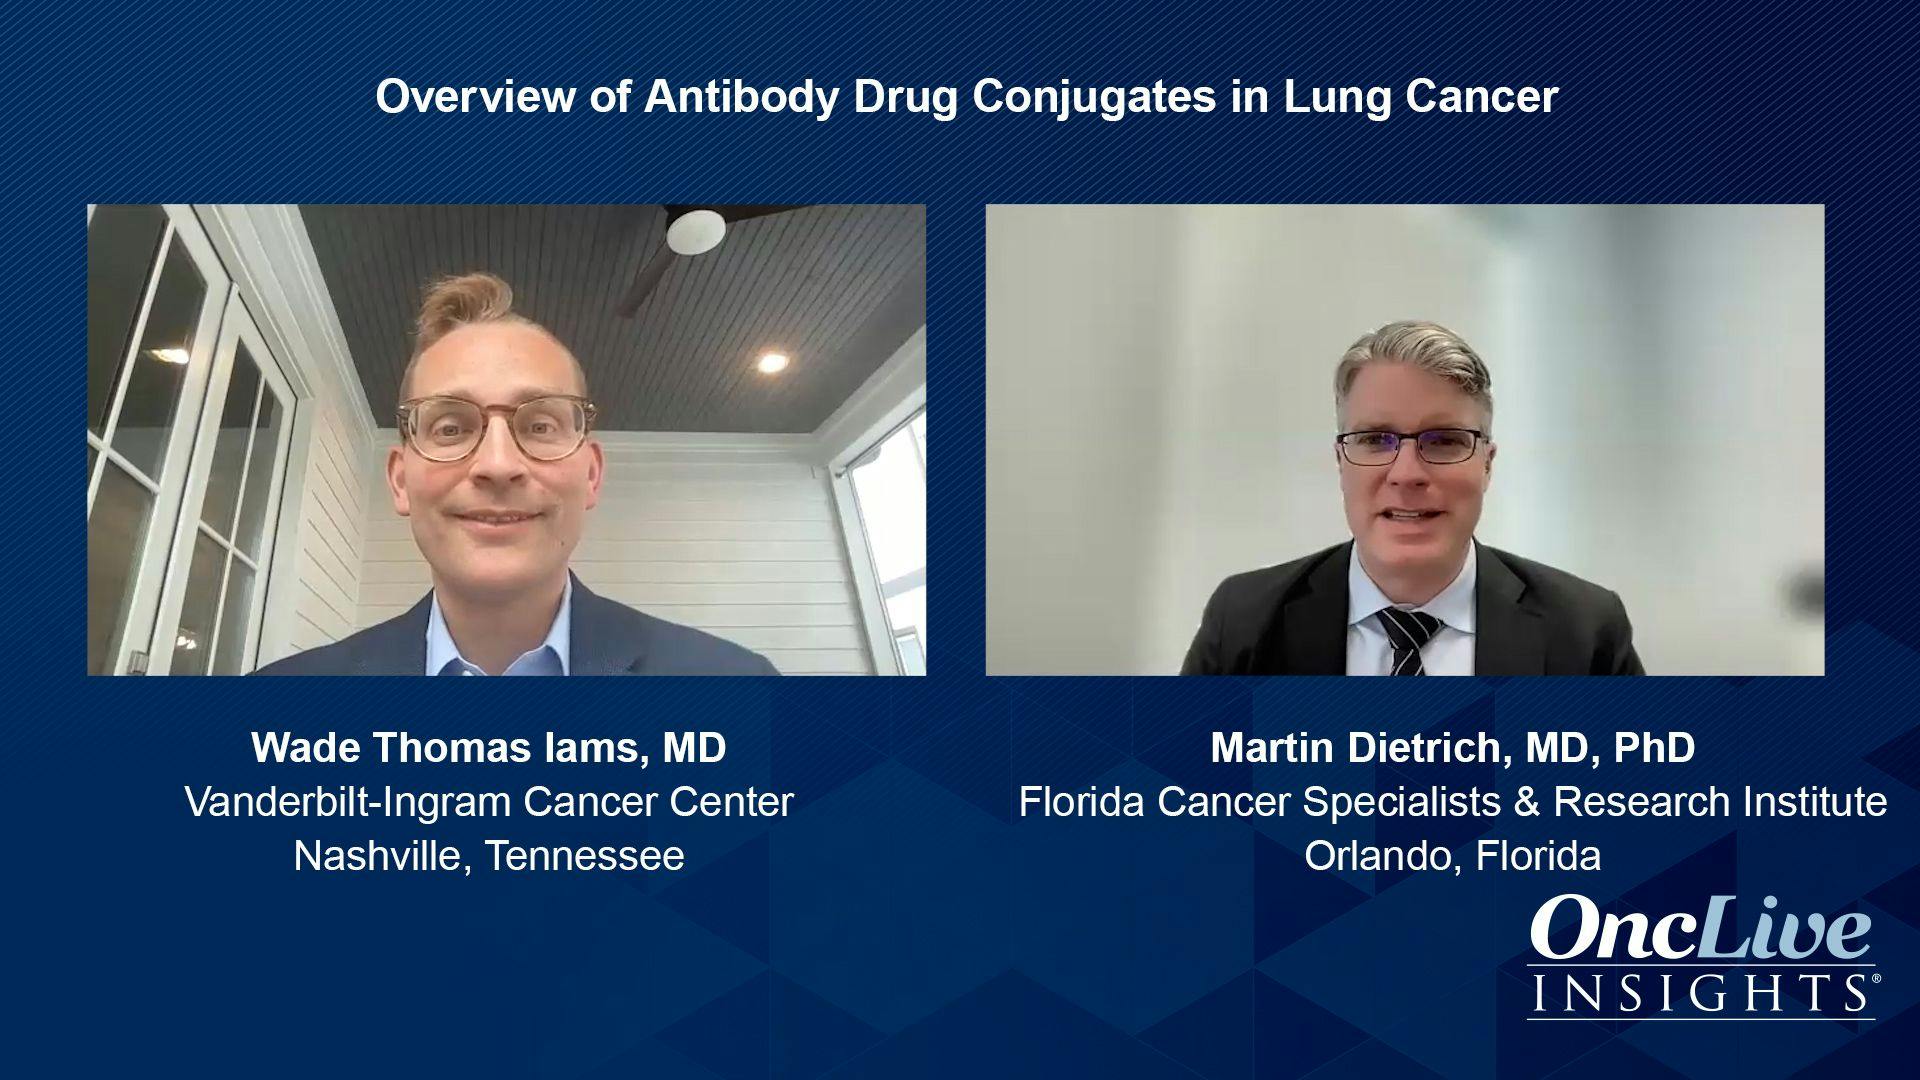 Overview of Antibody Drug Conjugates in Lung Cancer